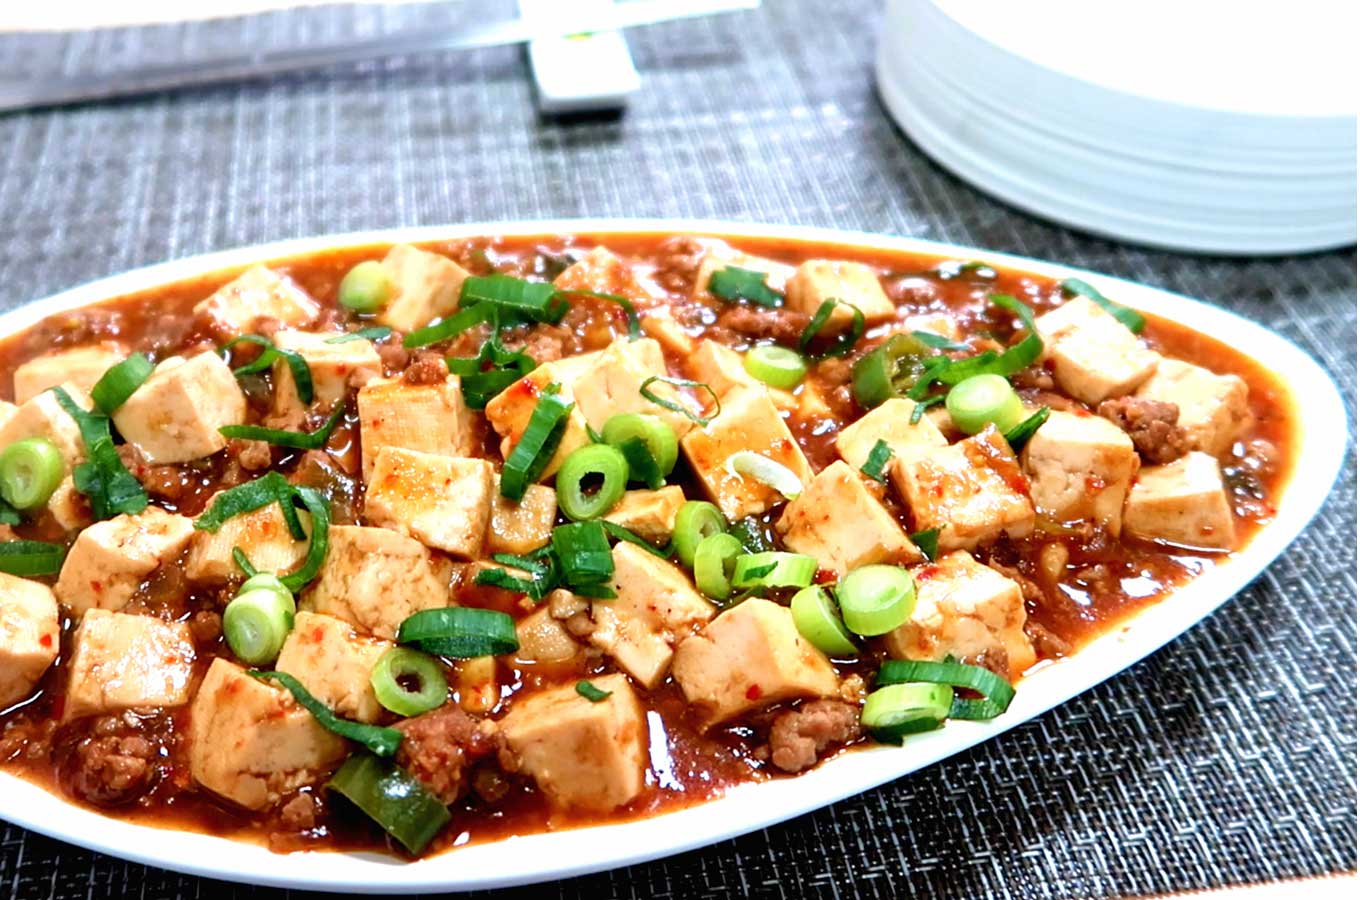 🥡 Order Some Chinese Food and We’ll Reveal What Your Fortune Cookie Says 🥠 Mapo tofu